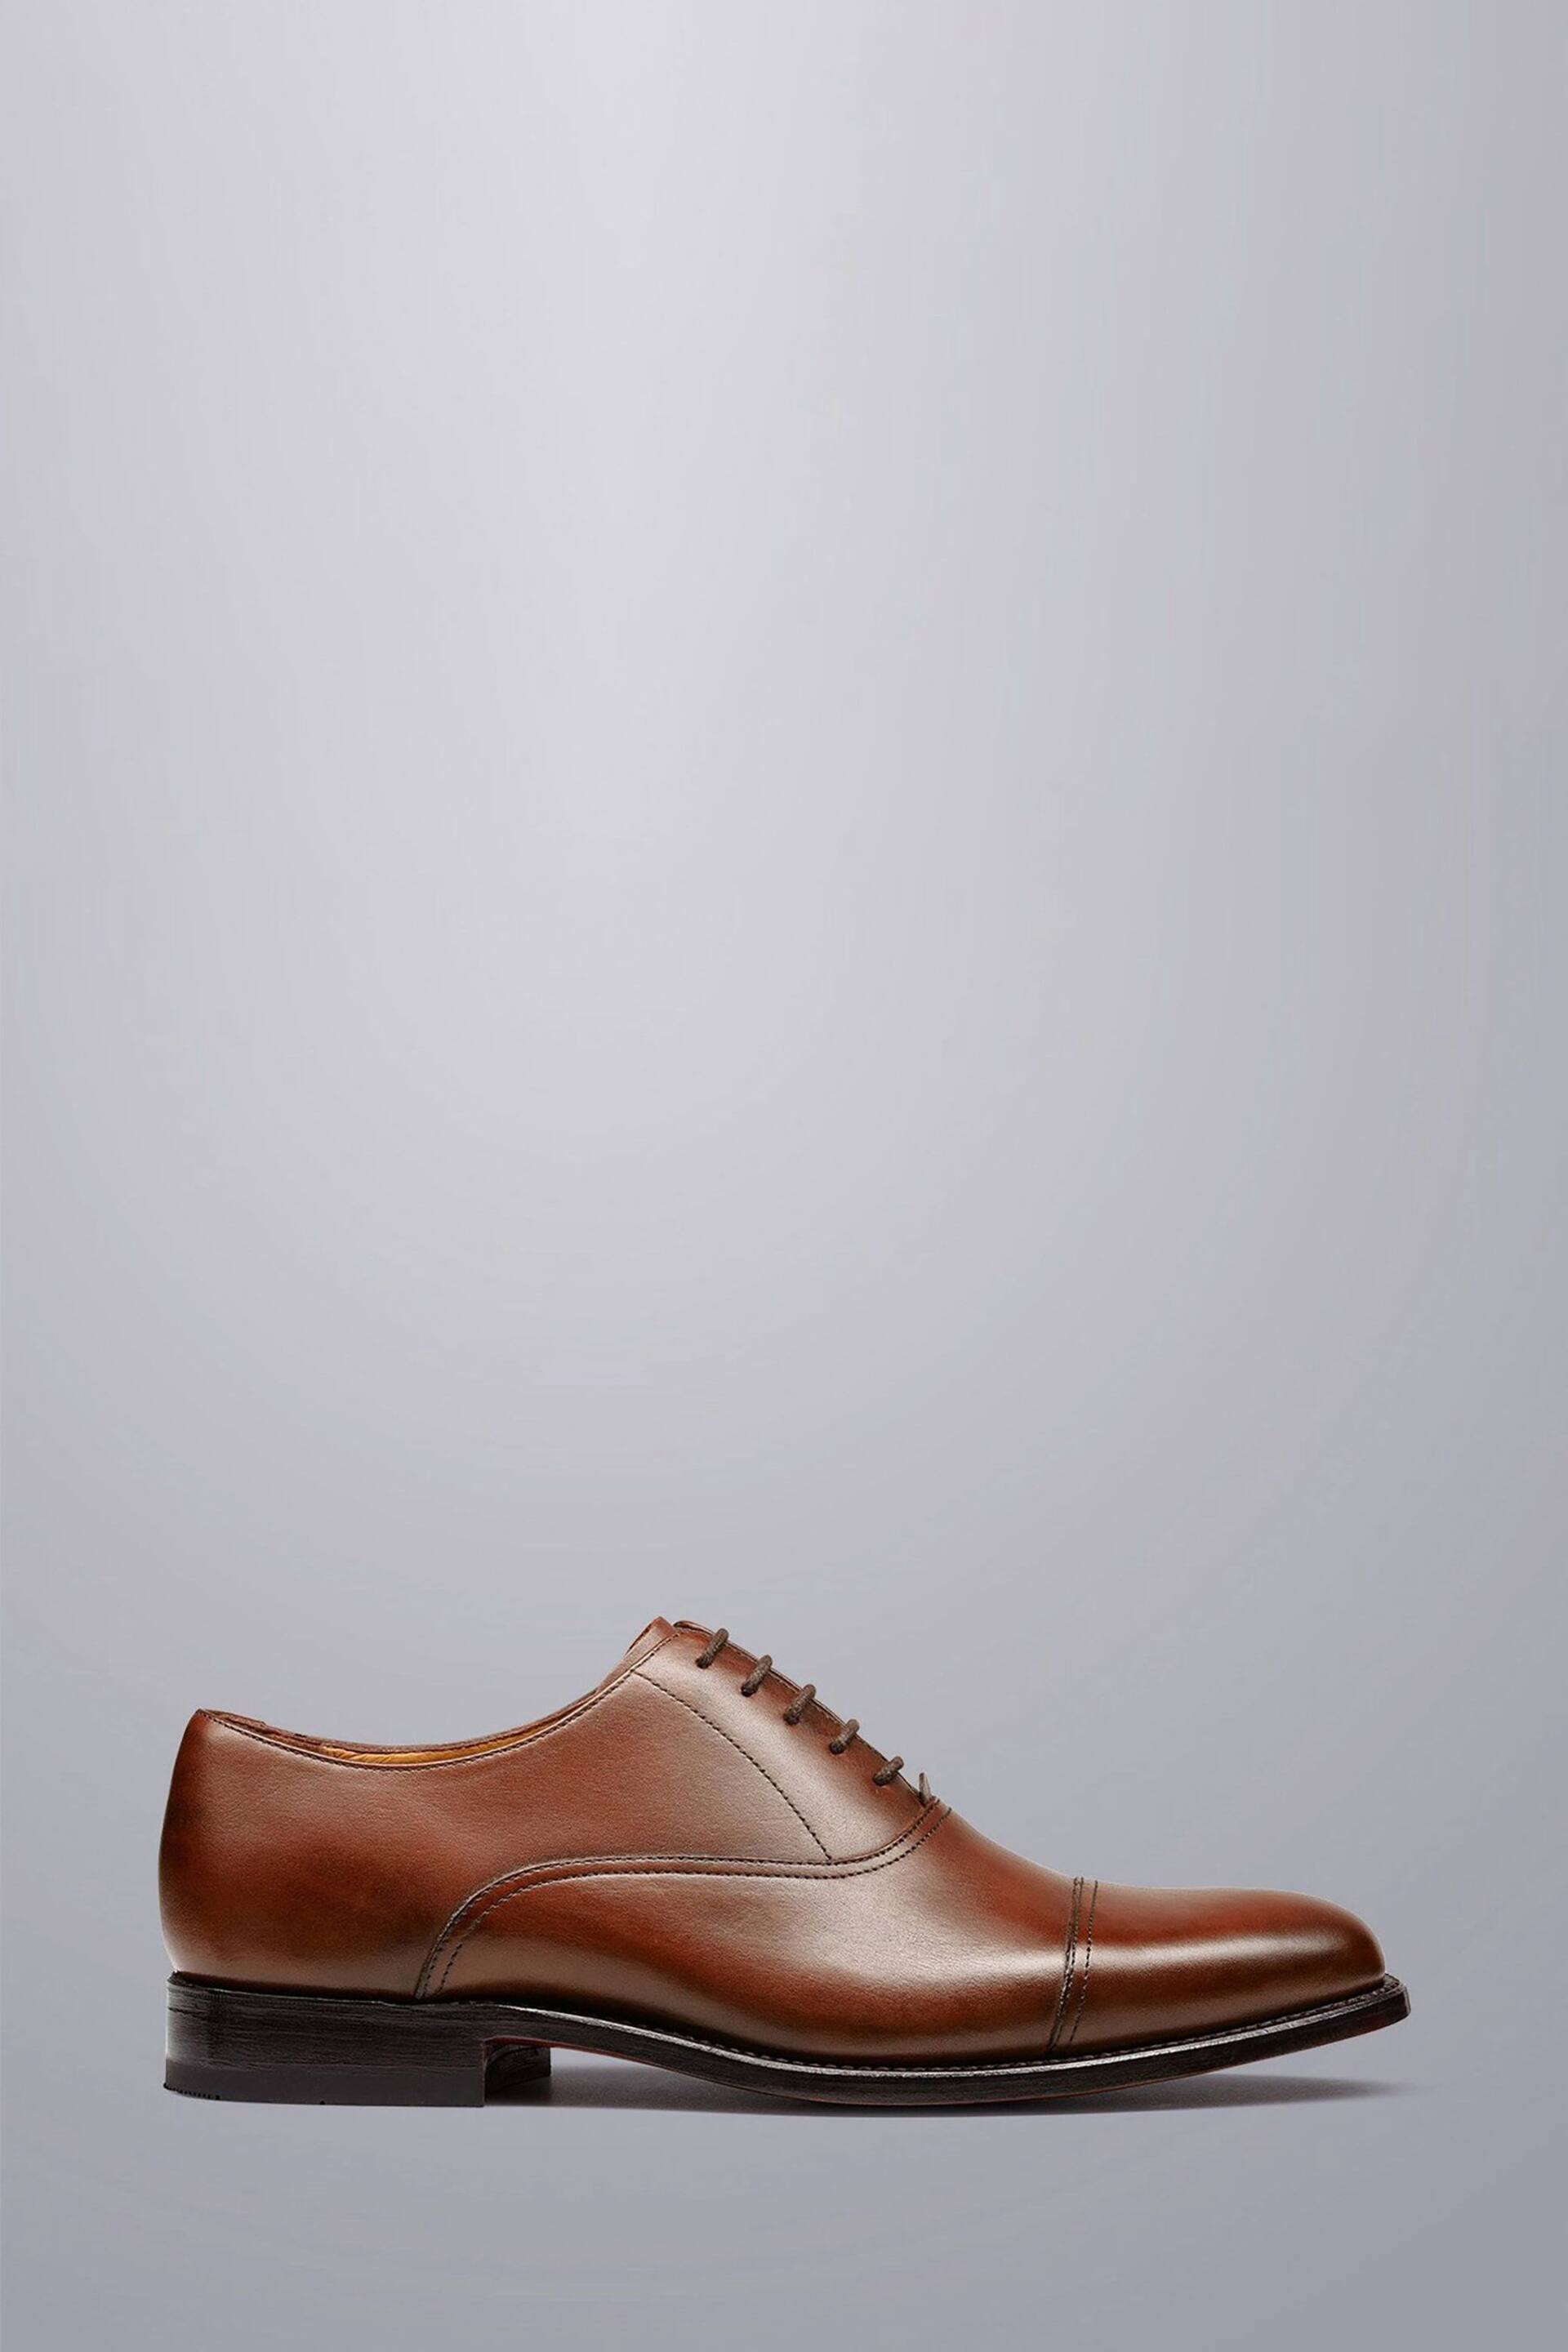 Charles Tyrwhitt Natural Leather Oxford Shoes - Image 1 of 4